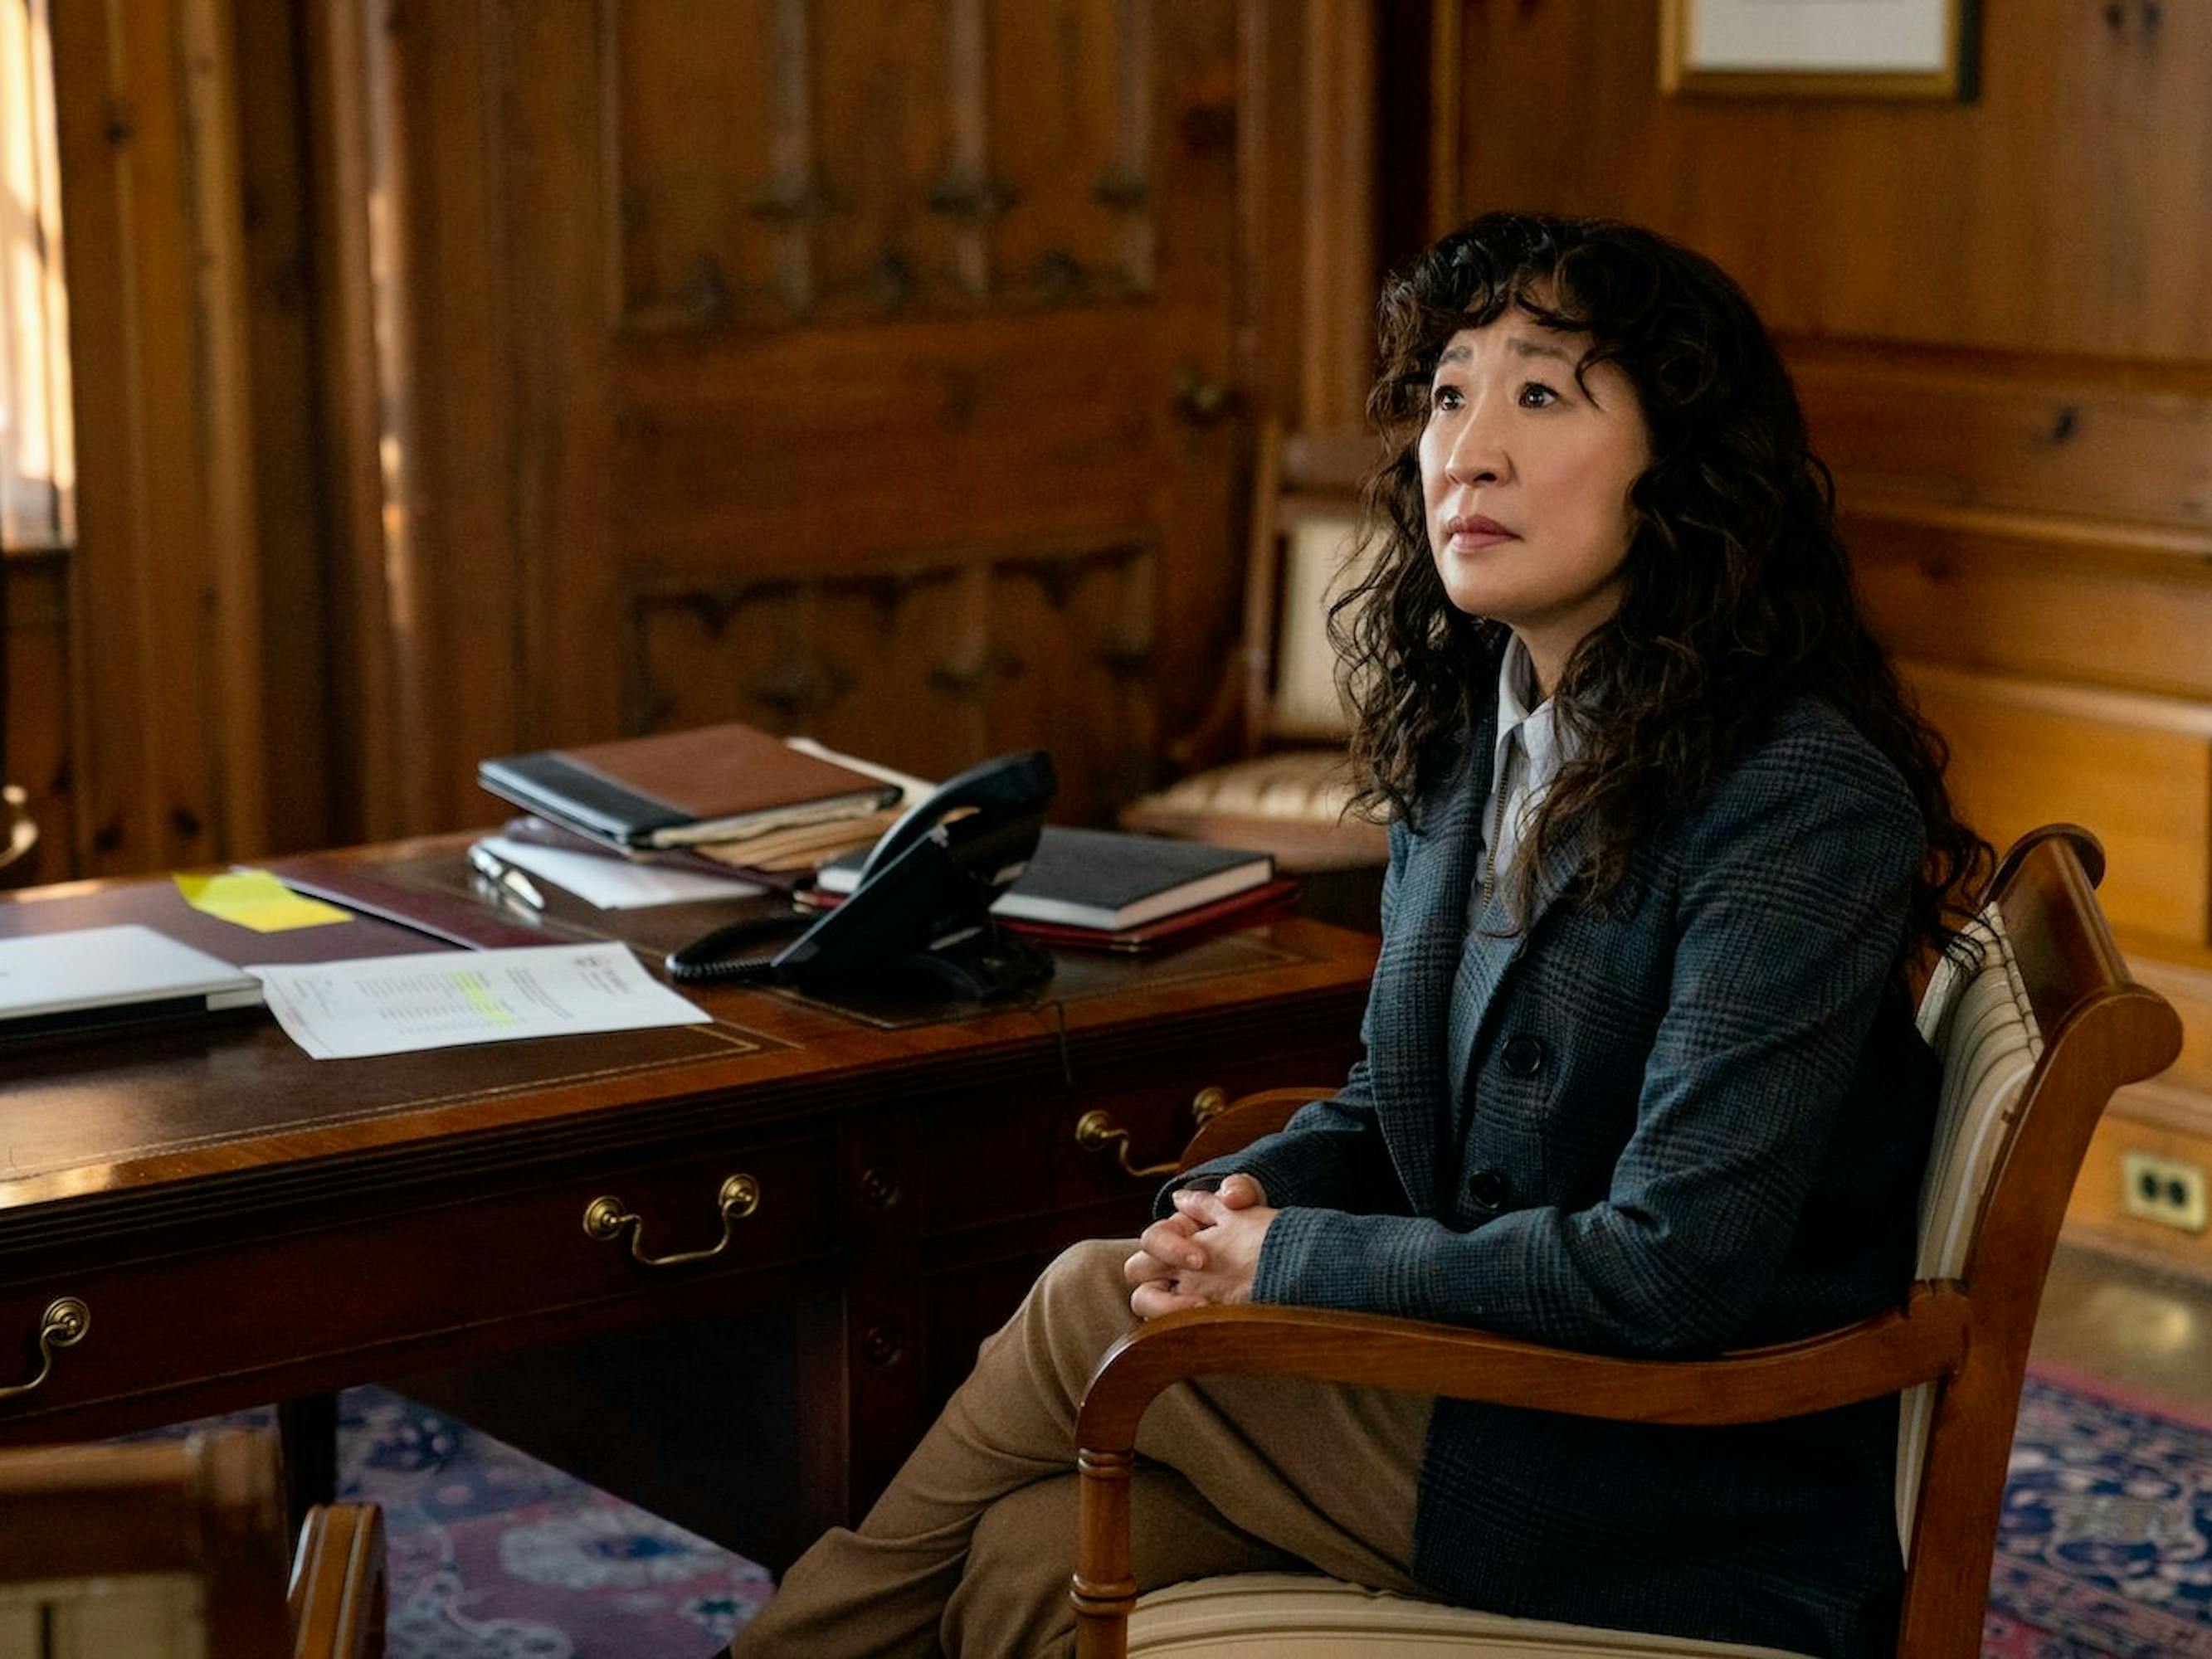 Dr. Ji-Yoon Kim (Sandra Oh) in The Chair sits in a wood paneled office wearing a black blazer. She looks attentively at someone off camera.